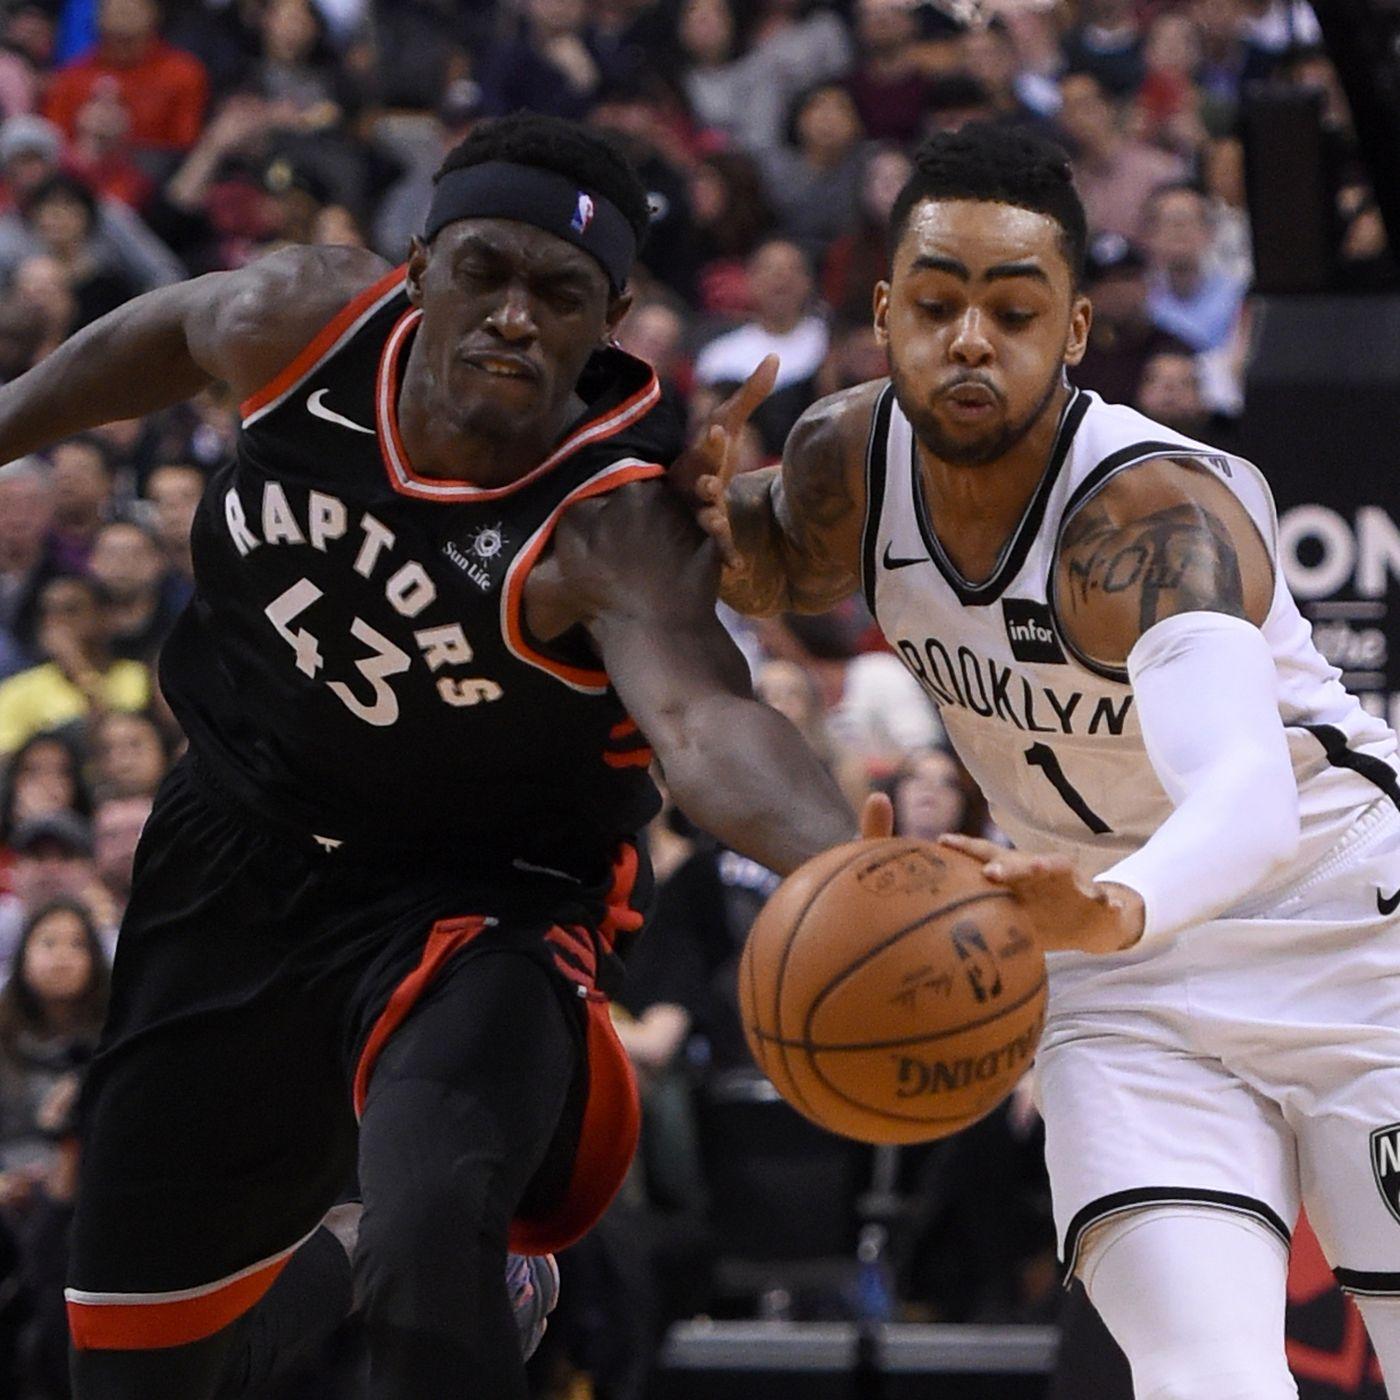 Pascal Siakam might be Most Improved Player, but these 4 players